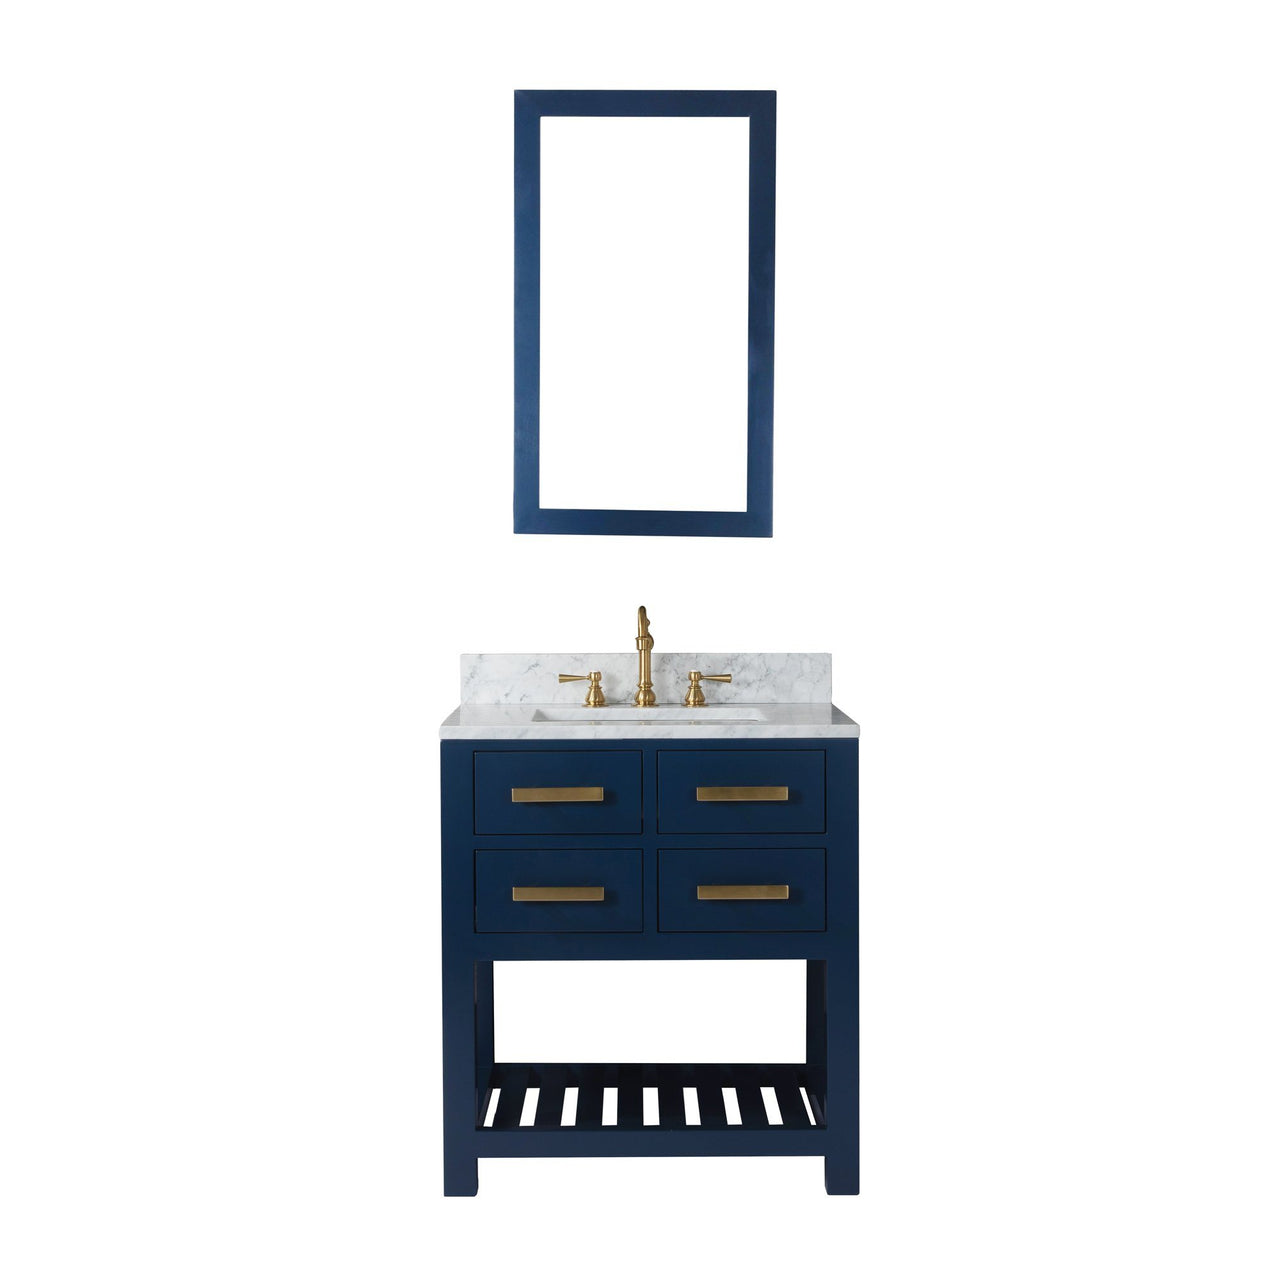 30 Inch Monarch Blue Single Sink Bathroom Vanity With F2-0012 Satin Brass Faucet From The Madalyn Collection Vanity Water Creation 